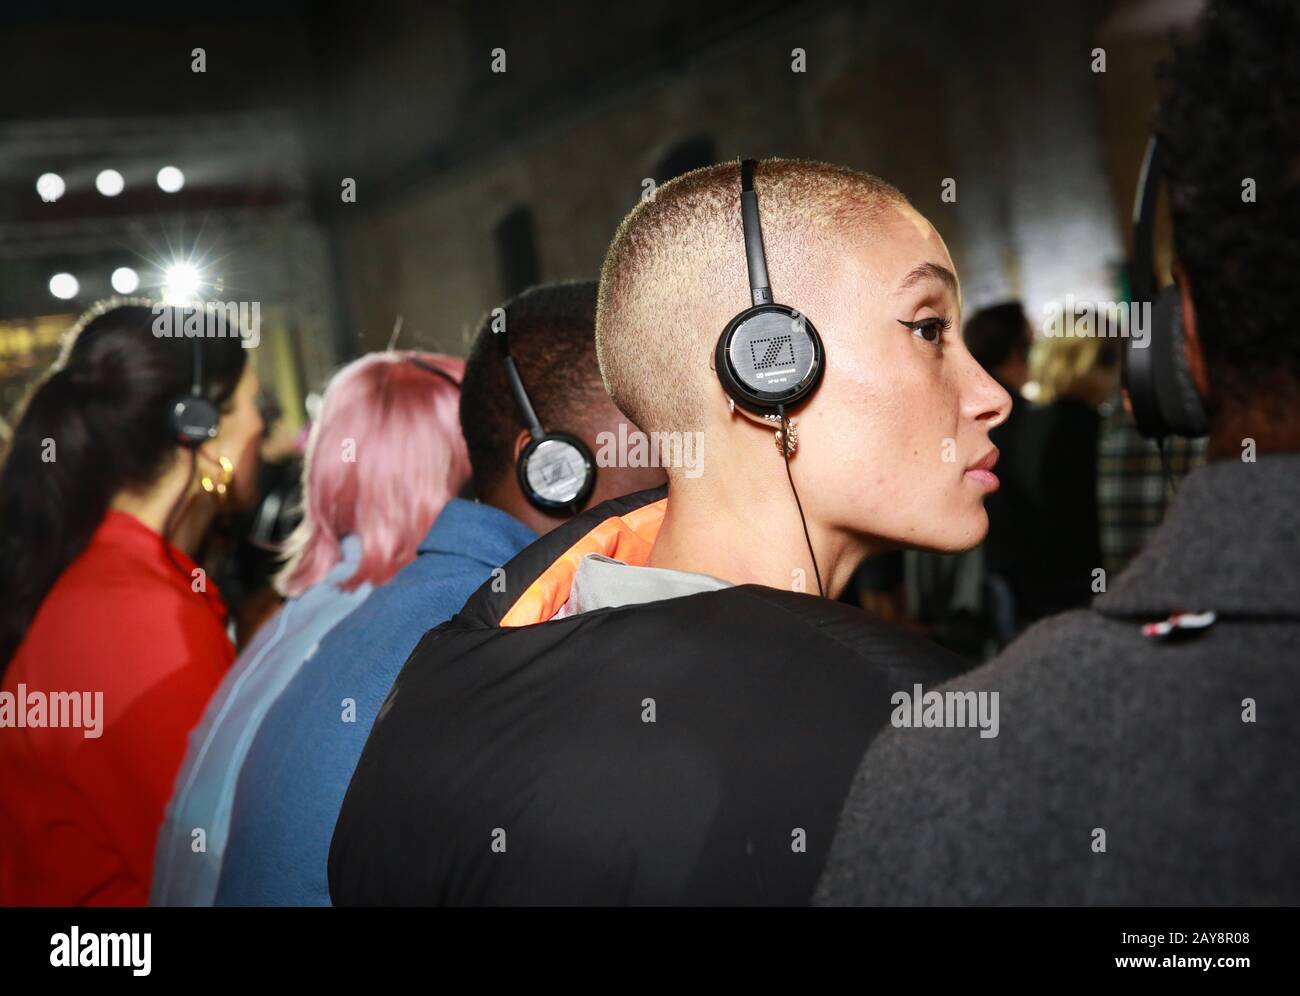 EDITORIAL USE ONLY Model Adwoa Aboah watches a digitally generated version of herself walk down the catwalk, showcasing Three's 5G technology in a world first at the Central Saint Martin's MA show at London Fashion Week. Stock Photo